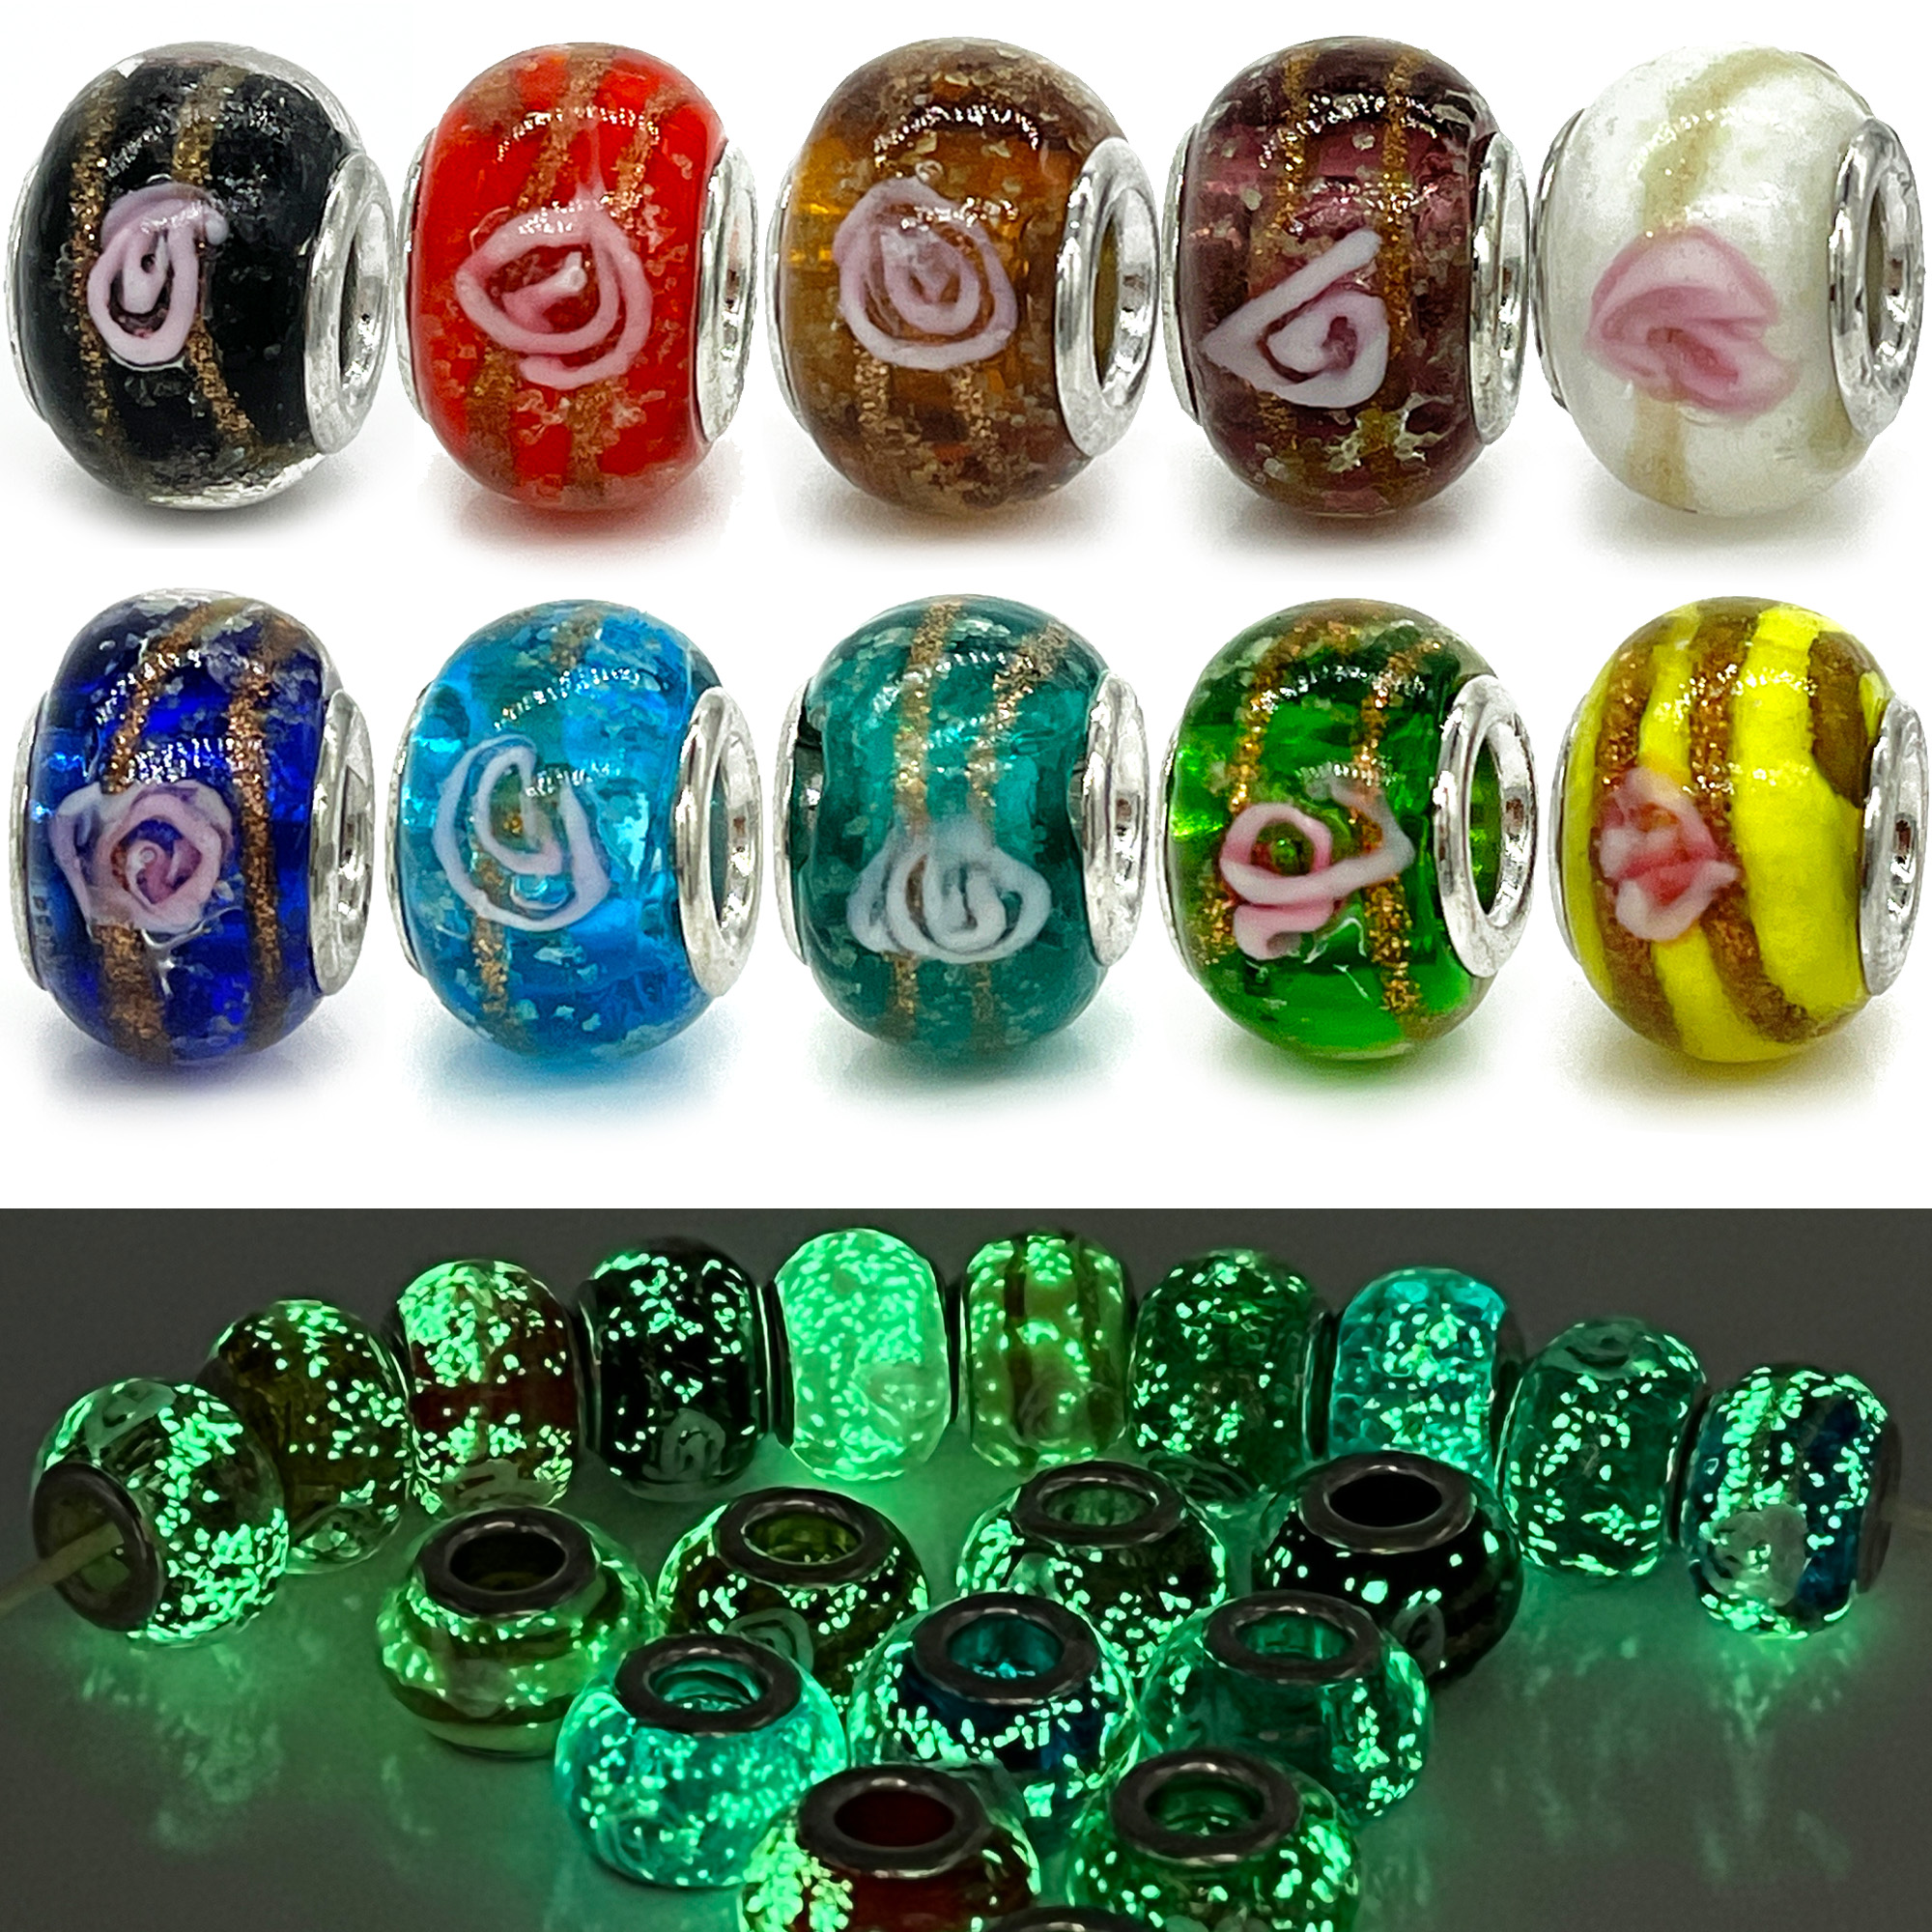 Artsy Crafts 20 Pcs Assorted Glow in The Dark Firefly Large Hole Beads, Luminous European Lampwork Glass Beads, Loose Crystal Beads for Jewelry